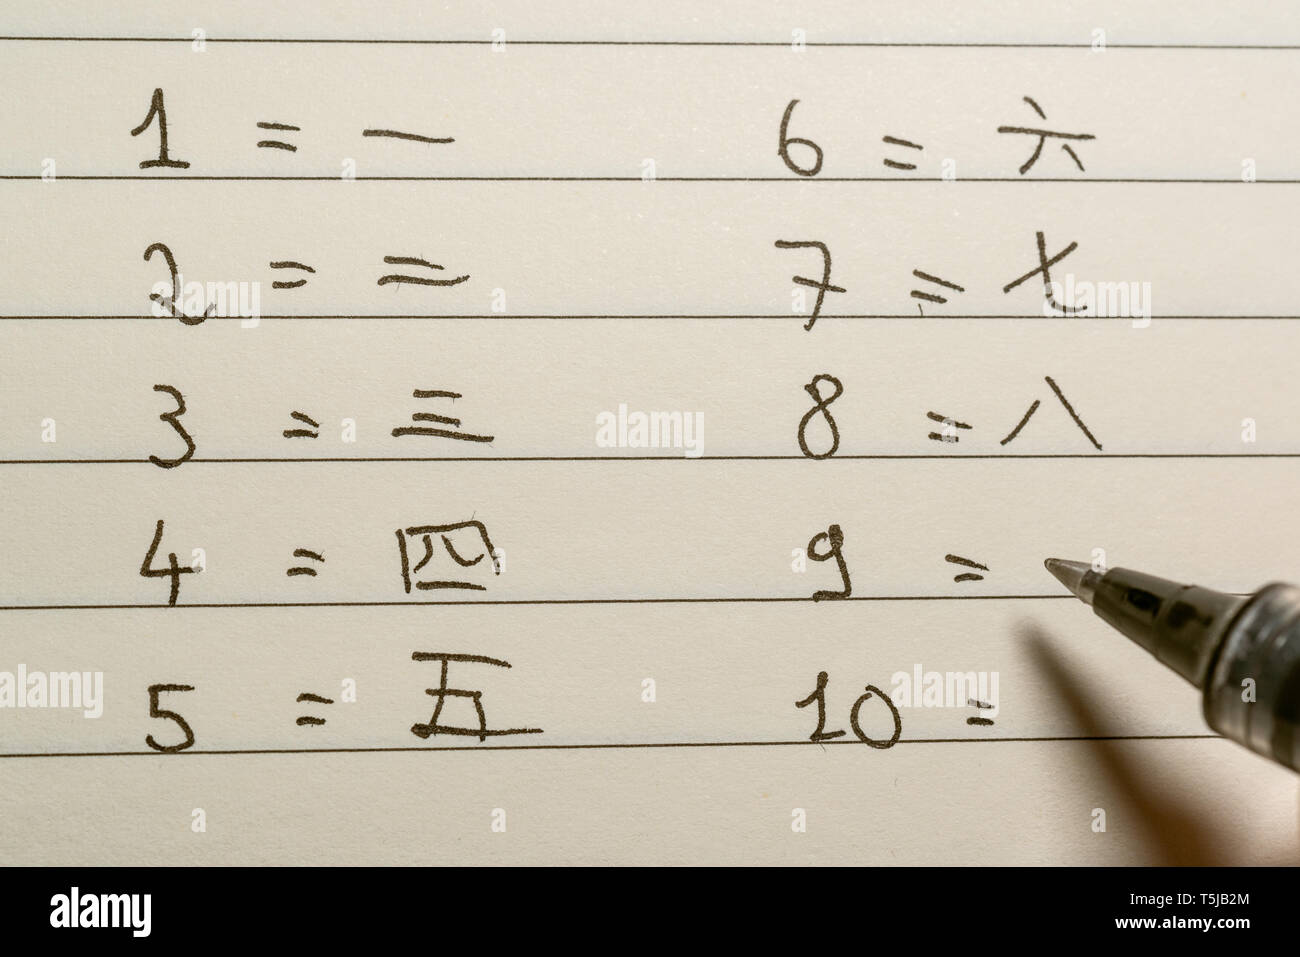 Beginner Chinese language learner writing numbers in Chinese